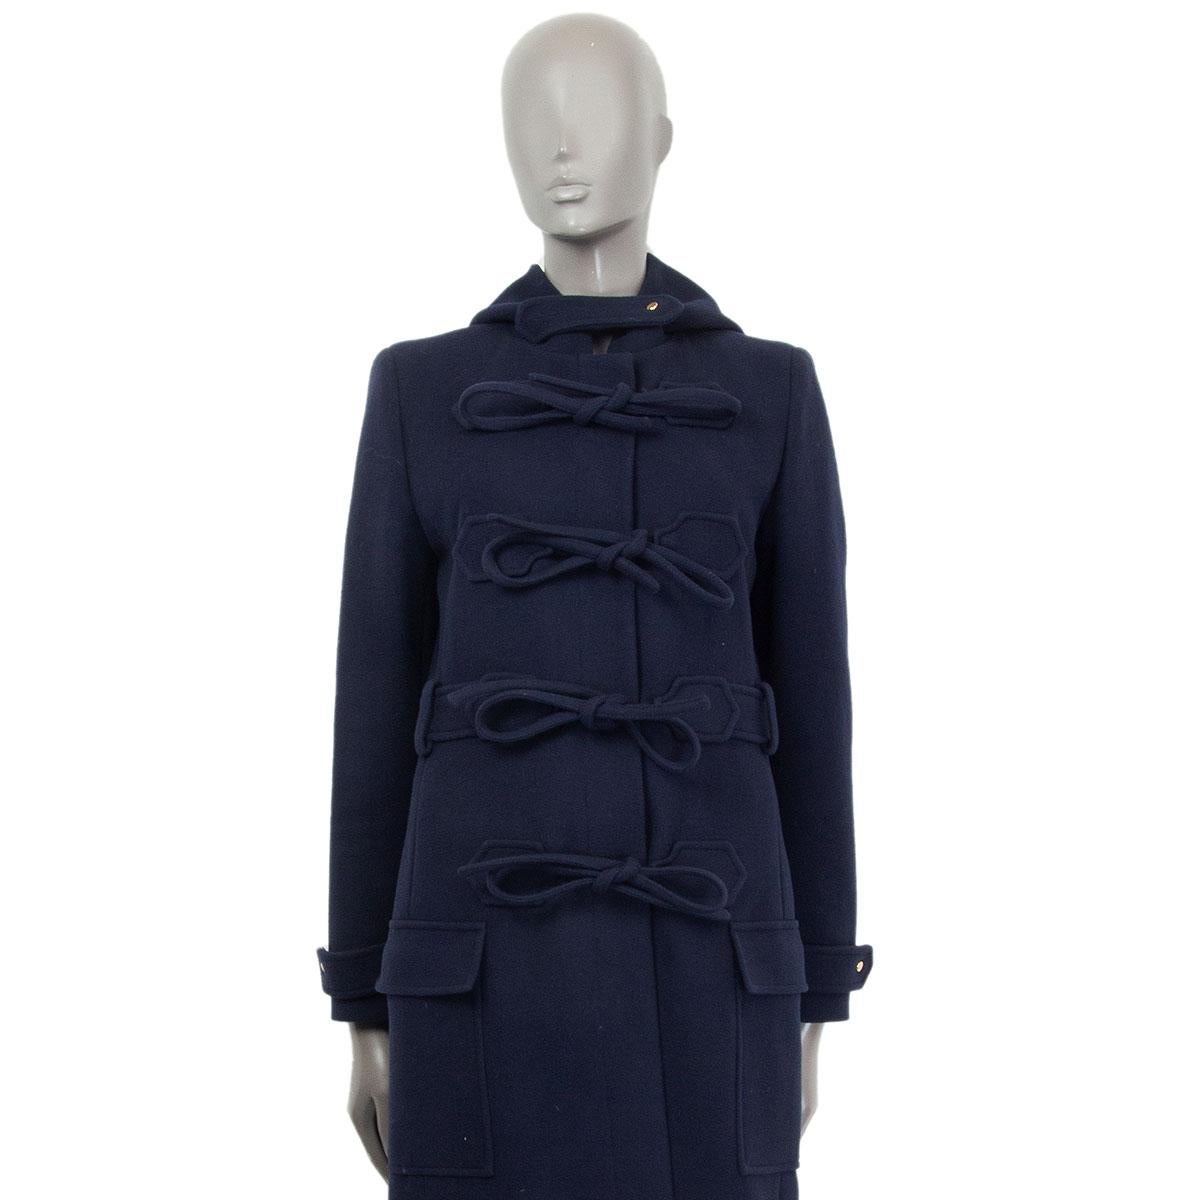 authentic Balenciaga hooded coat in blue virgin wool (75%) and polyamide (25%) with one epaulette at the neck and at the sleeves hem. Closes with concealed buttons and binding ribbons on the front with flap pockets. Lined in black cupro (100%). Has